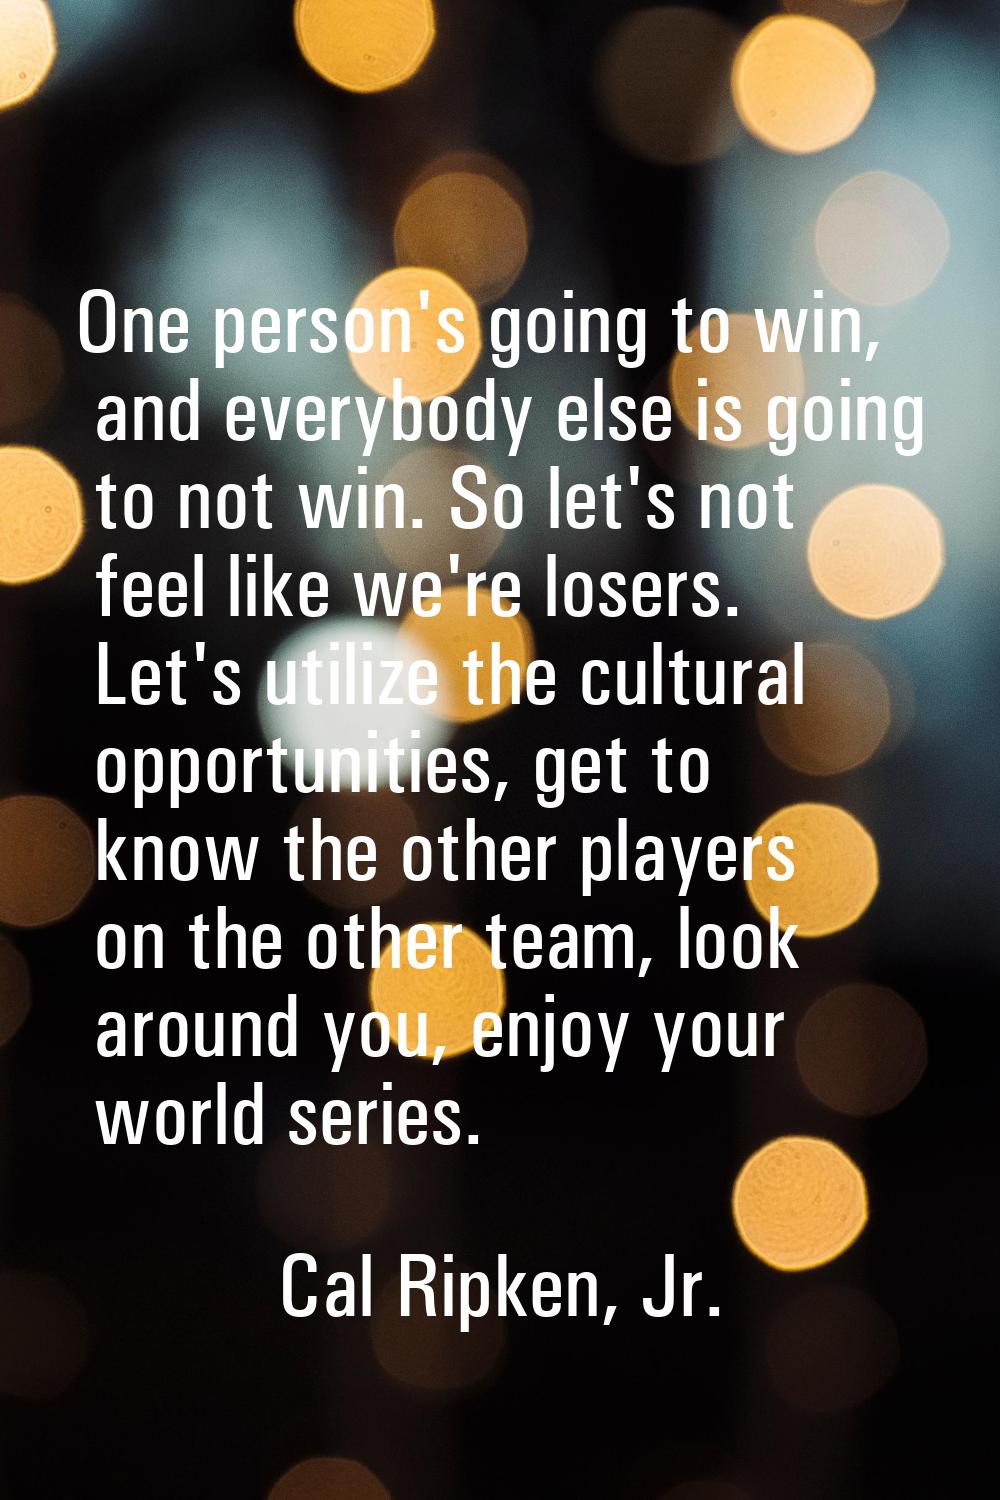 One person's going to win, and everybody else is going to not win. So let's not feel like we're los